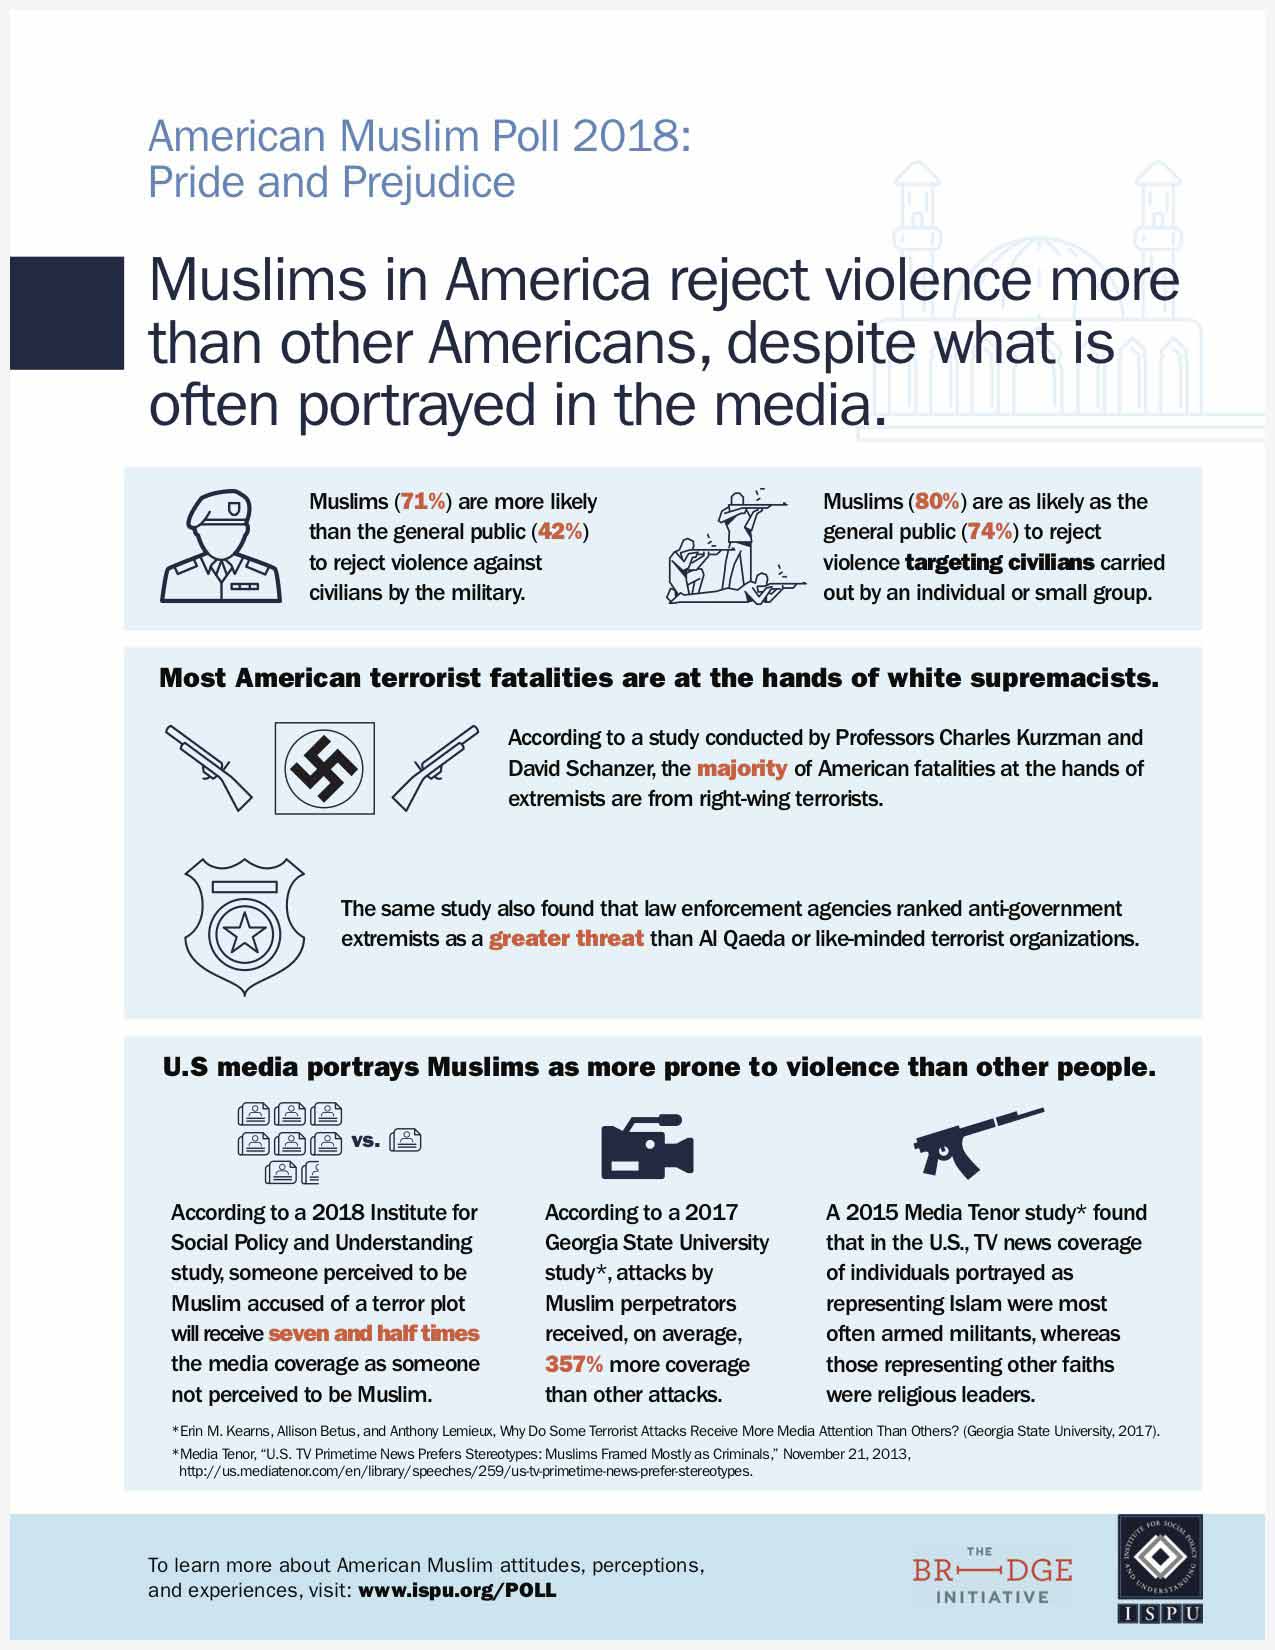 Muslims in America reject violence more than other Americans, despite what is often portrayed in the media infographic